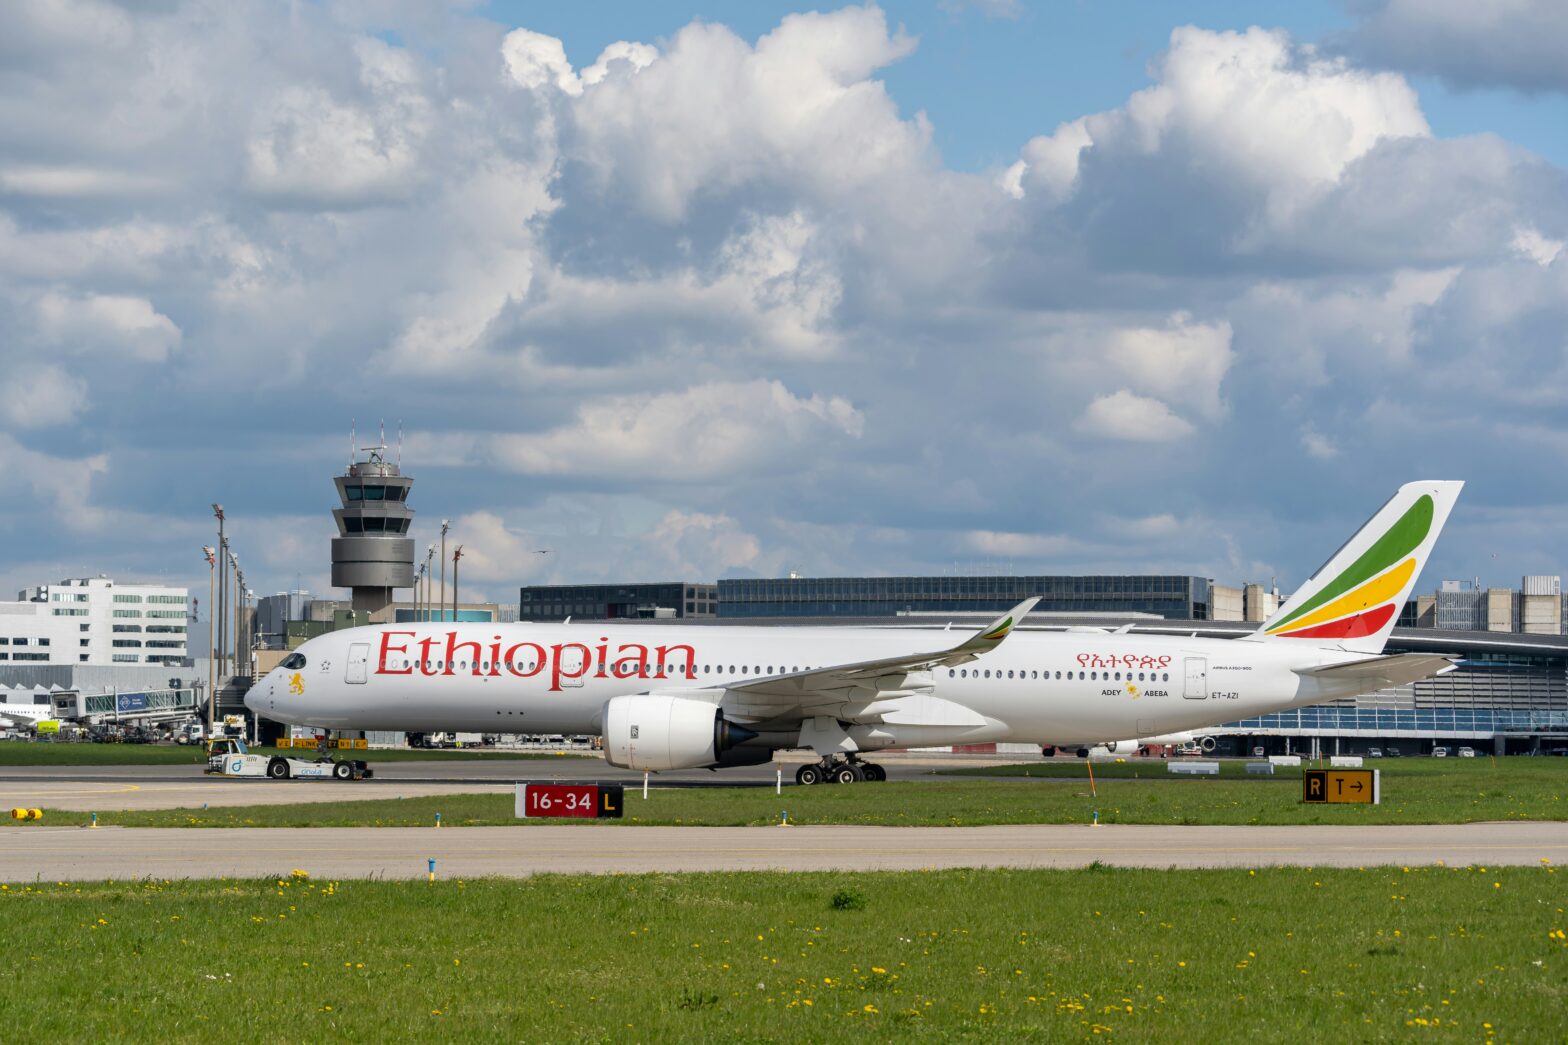 Chaos Erupts After Ethiopian Airlines Passenger Forced To Give Up Seat For Minister